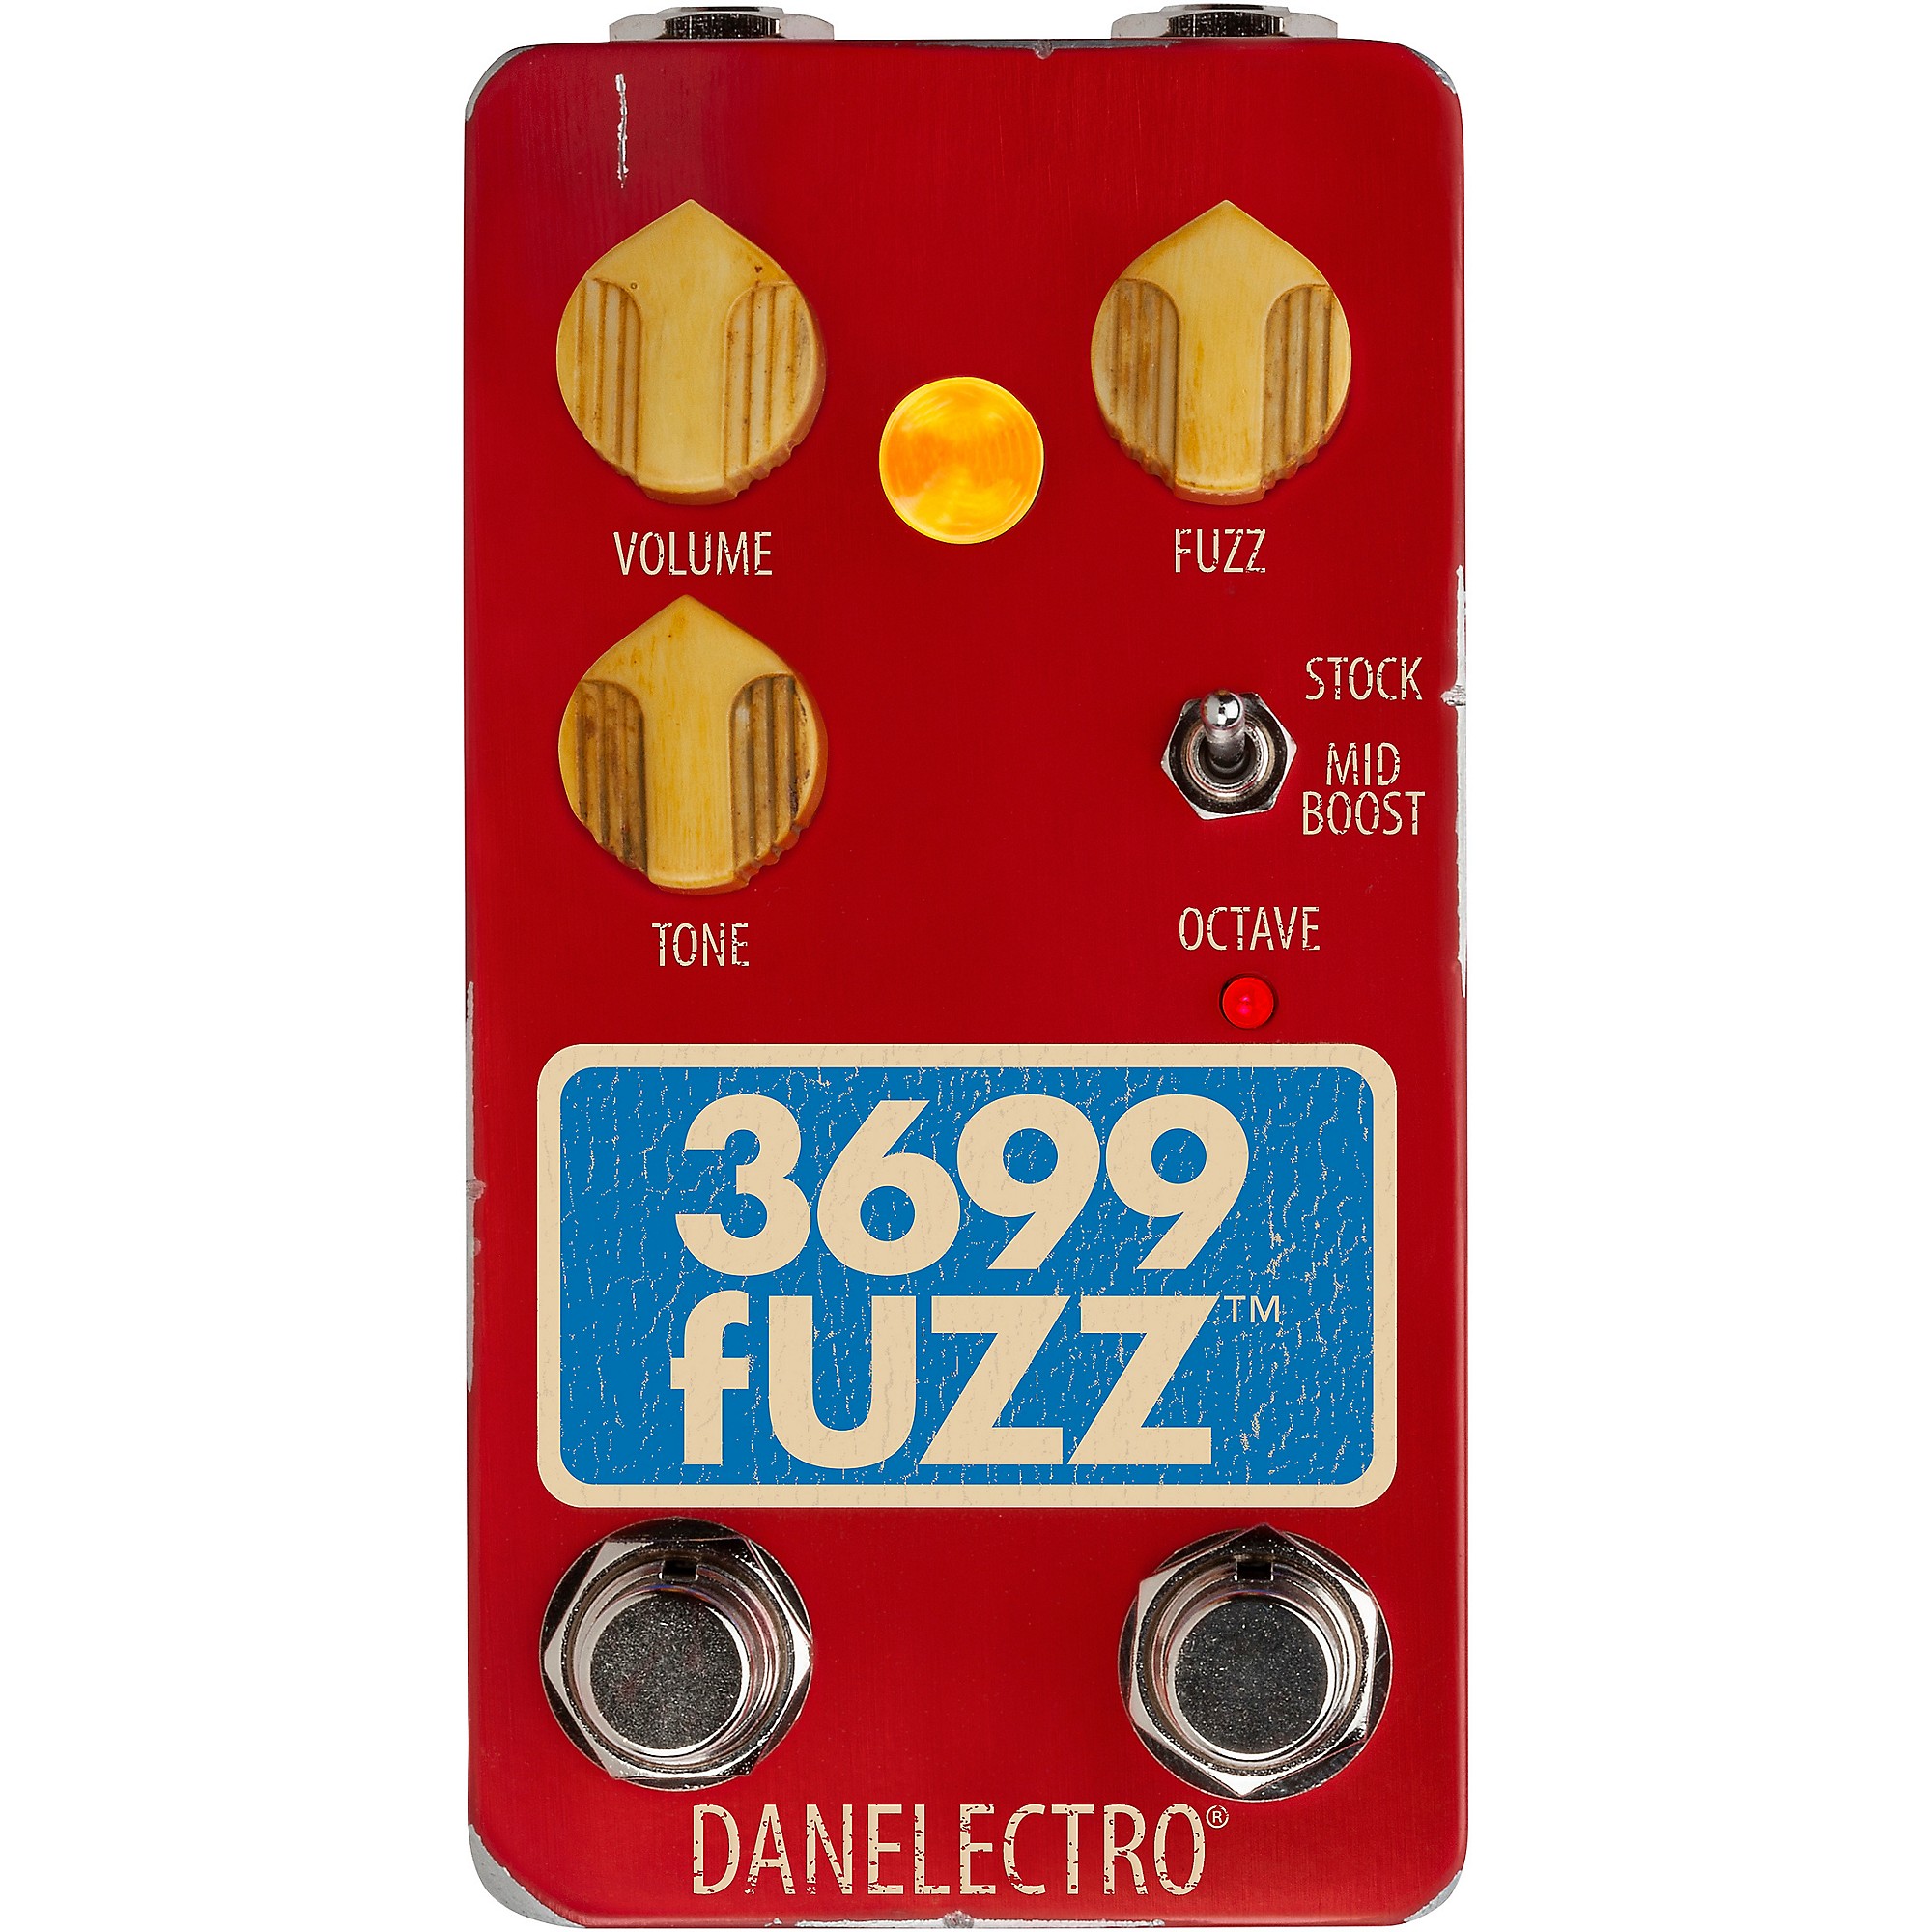 Fuzz　Center　Red　Danelectro　Pedal　Effects　3699　Guitar